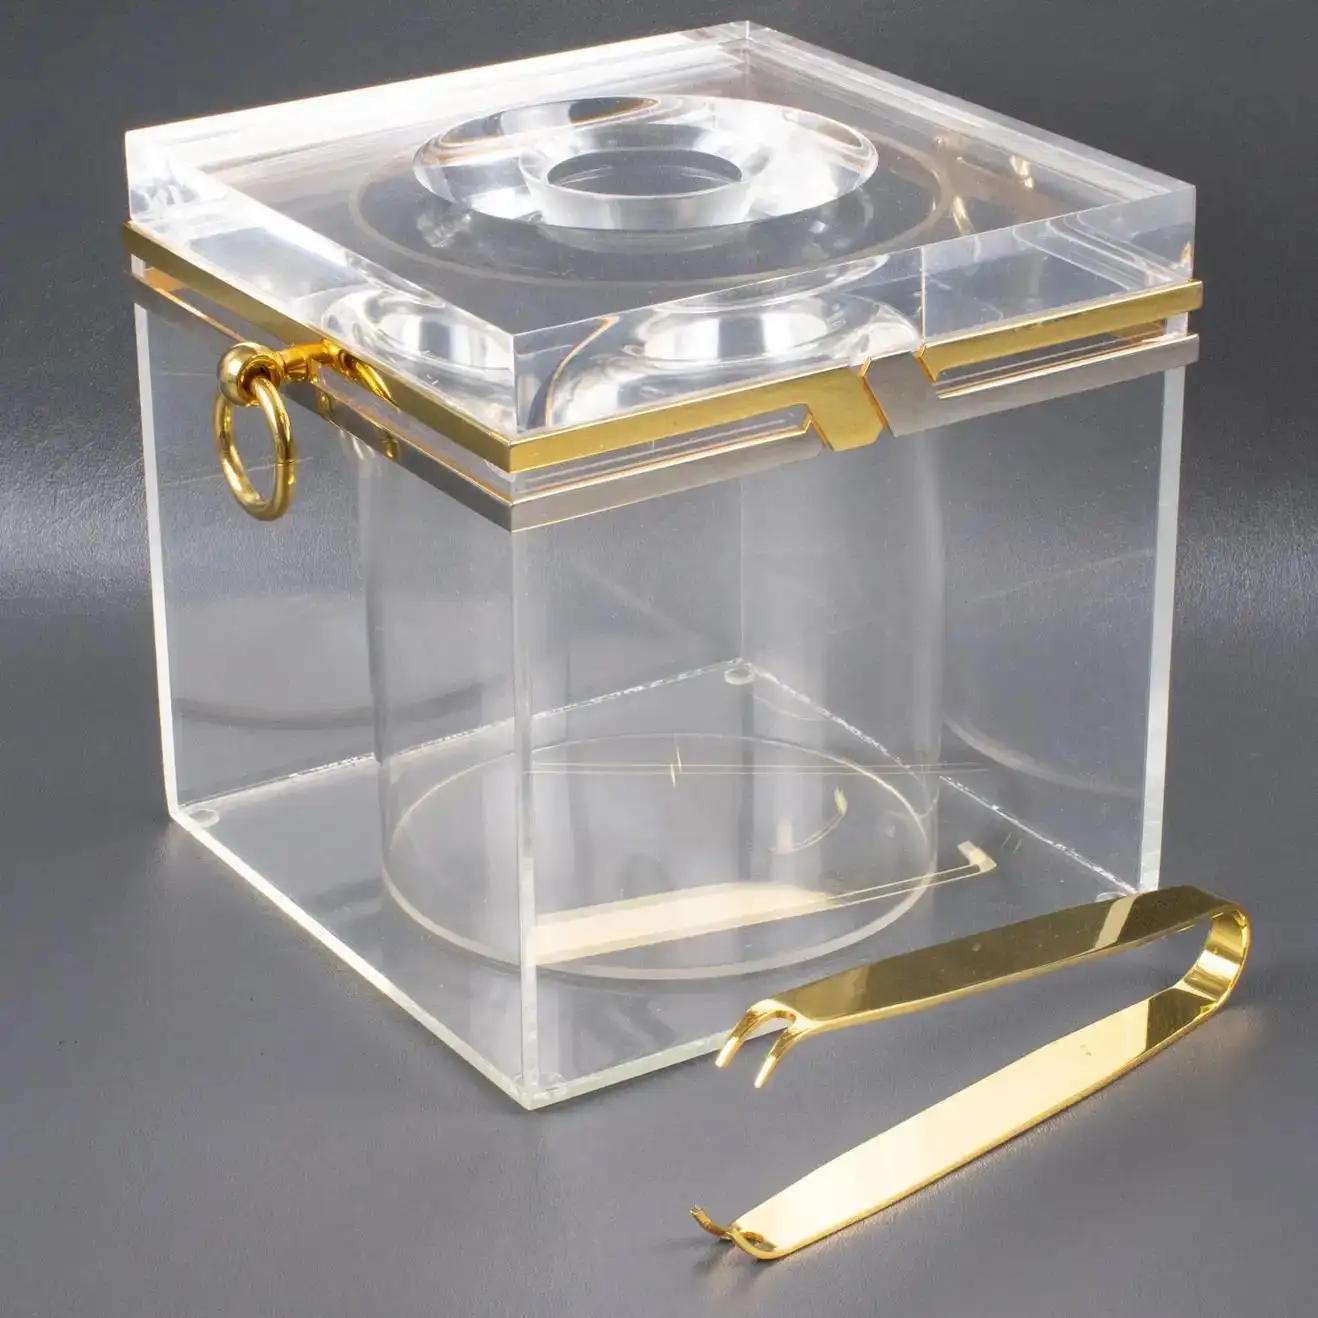 This is a stylish bar set, ice bucket, and tongs for a bar or cocktail party whose design is attributed to Romeo Rega, Italy, circa 1970. The barware accessory features a chrome and gilded brass metal framing with a crystal clear Lucite body and